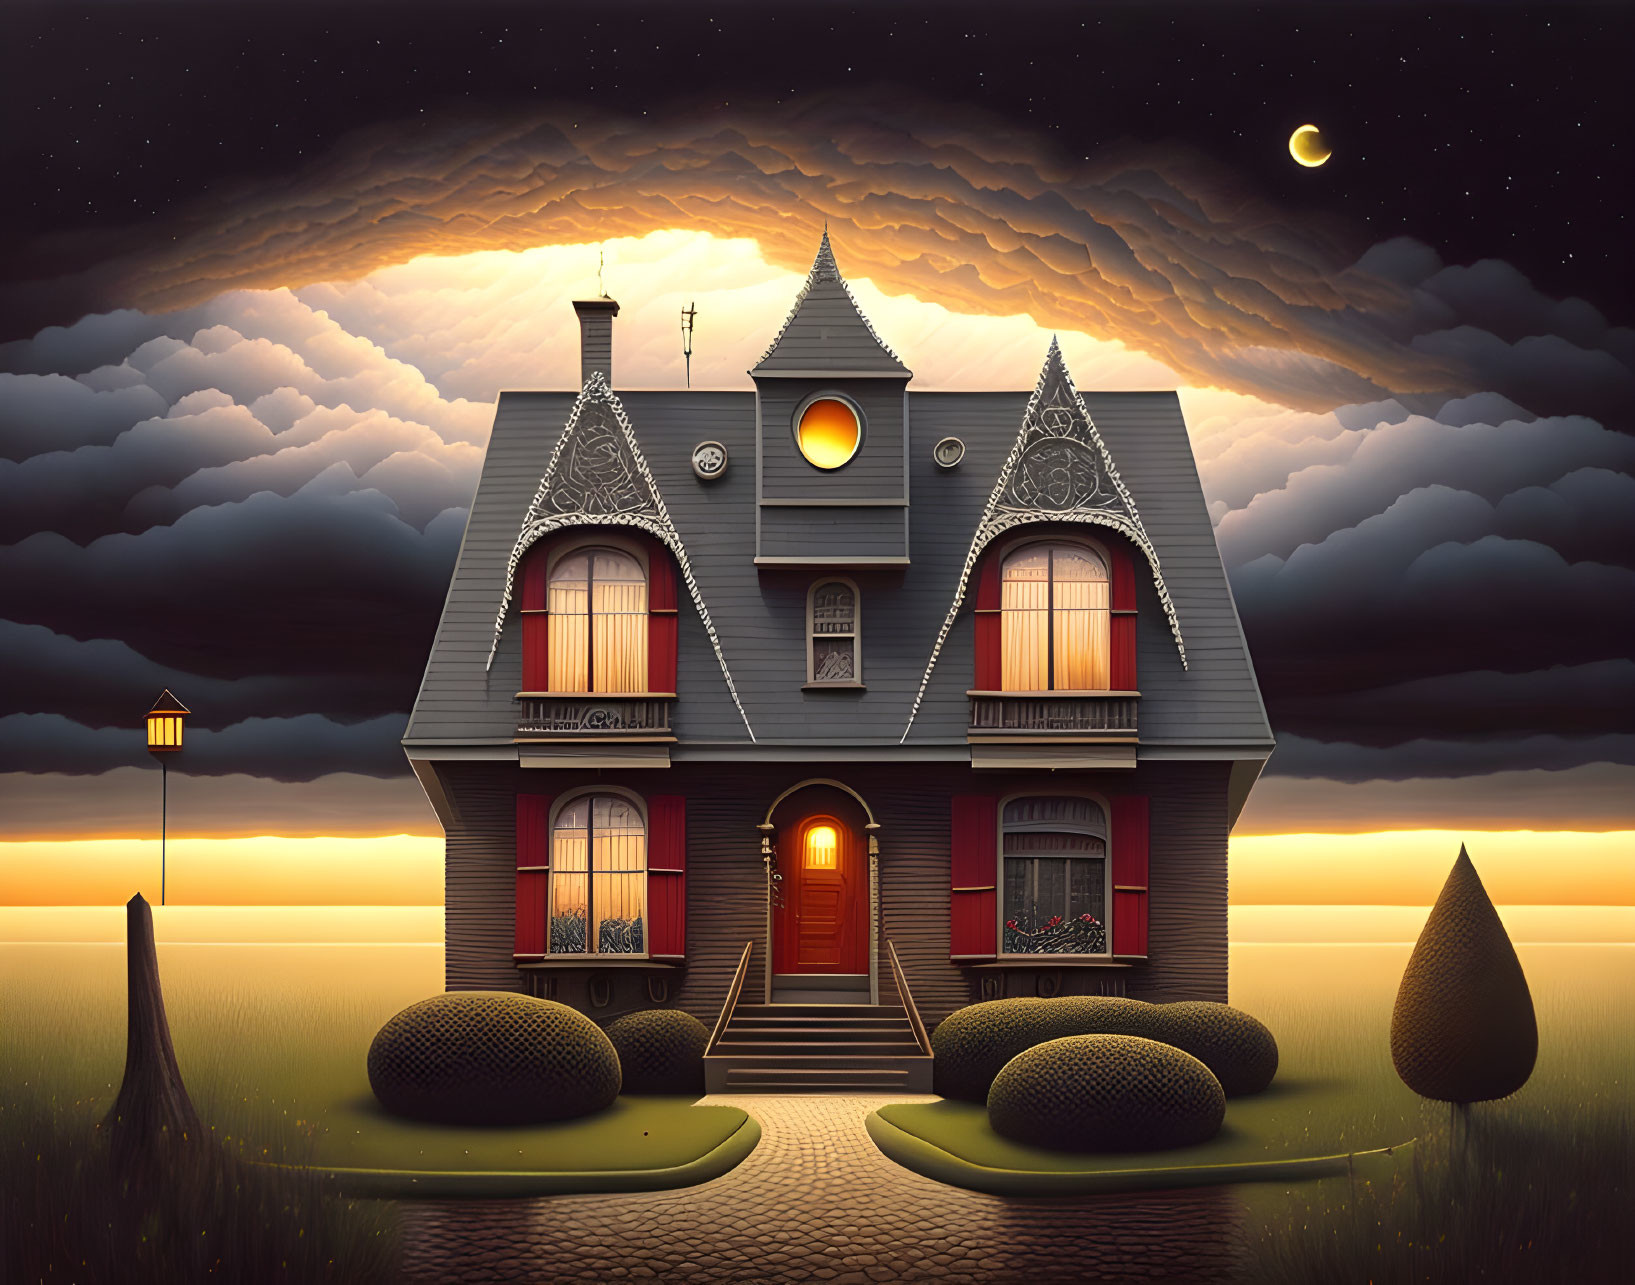 Victorian-style house at dusk with illuminated windows under crescent moon and dramatic sky.